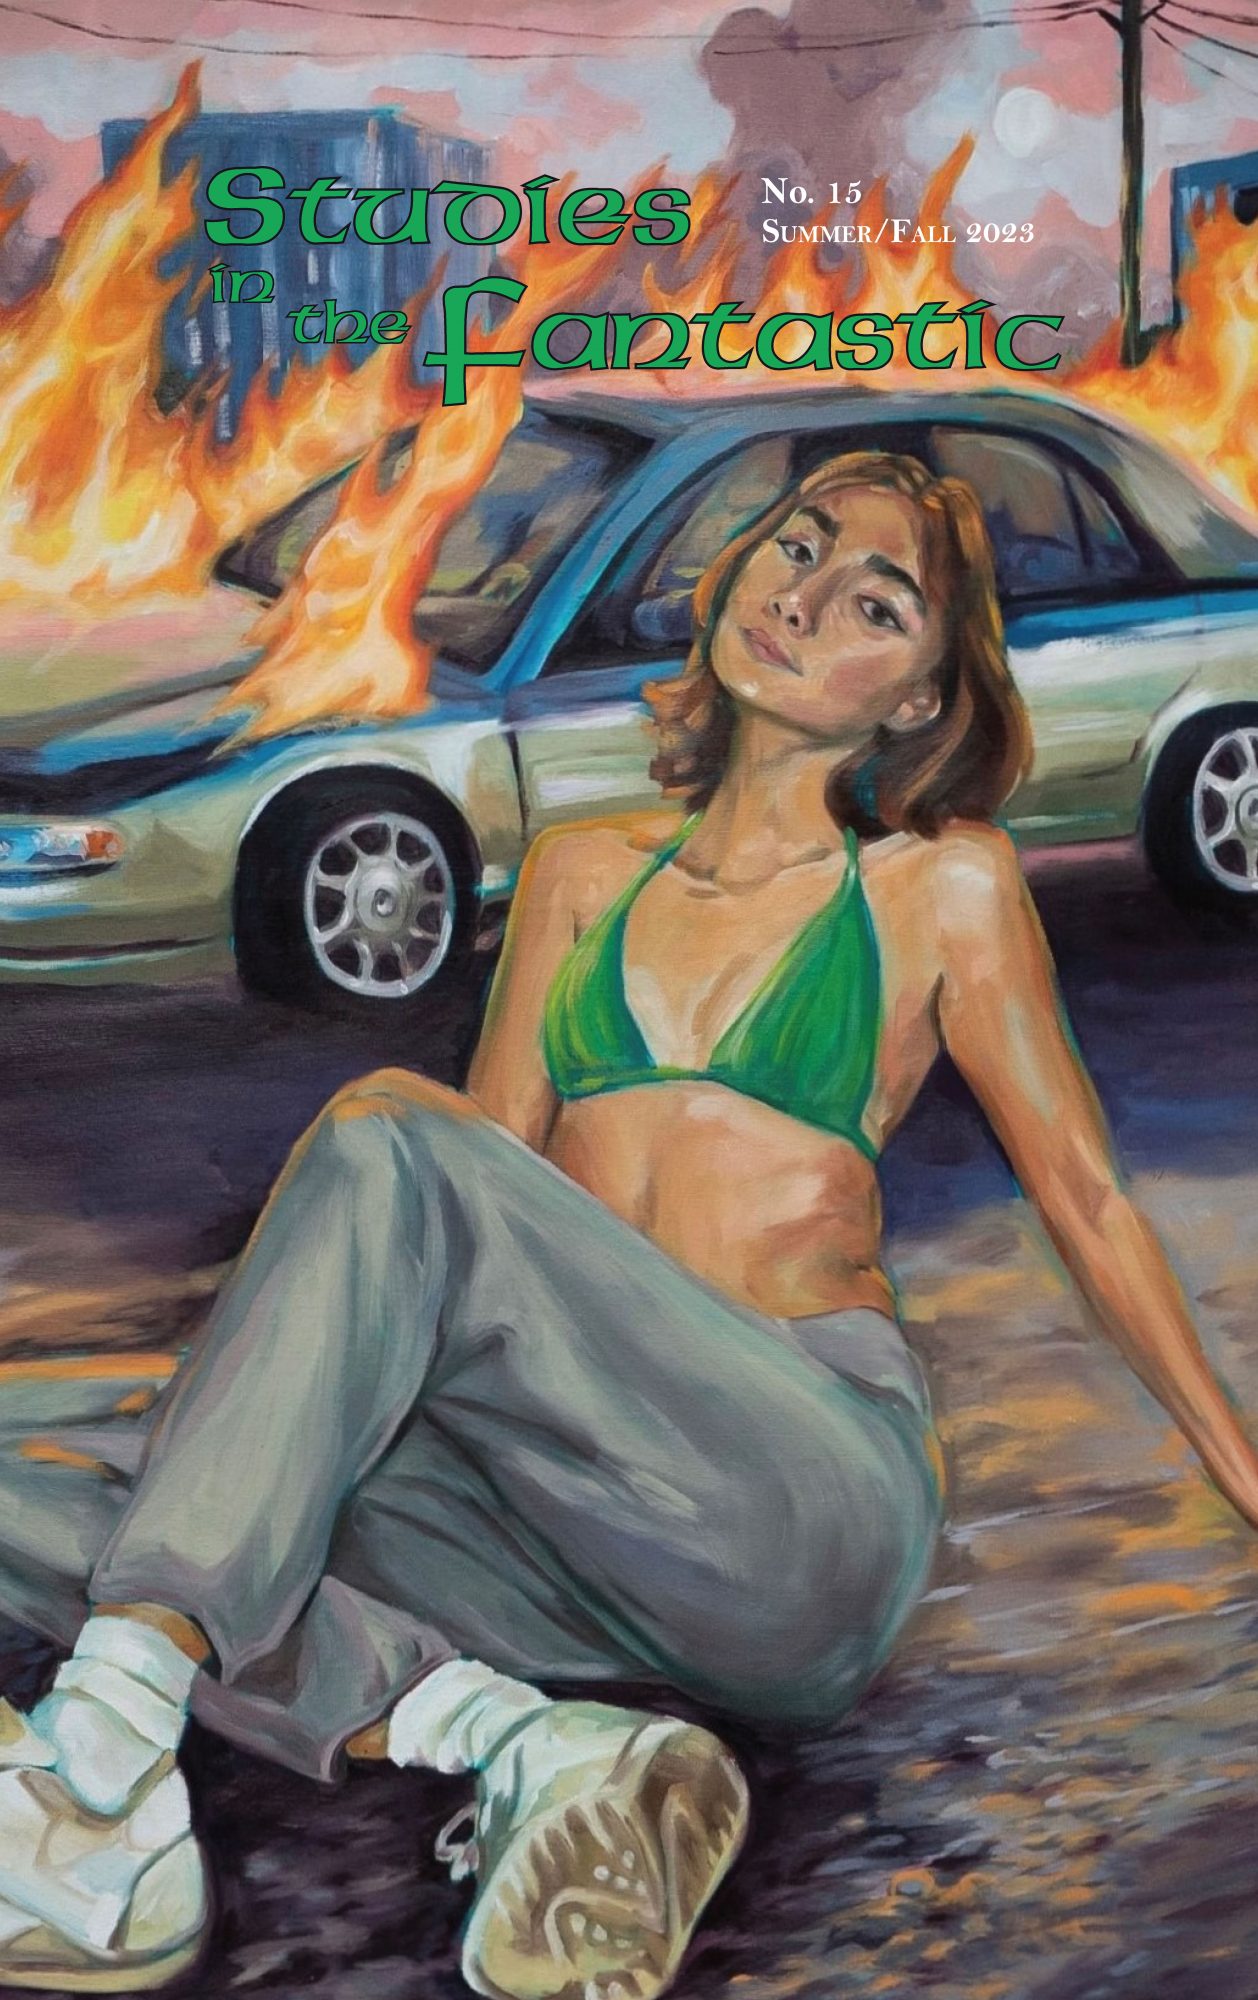 Image of the front cover of Studies in the Fantastic No. 15. A young woman in a bra or bikini top poses in the foreground of an urban landscape and a burning car.